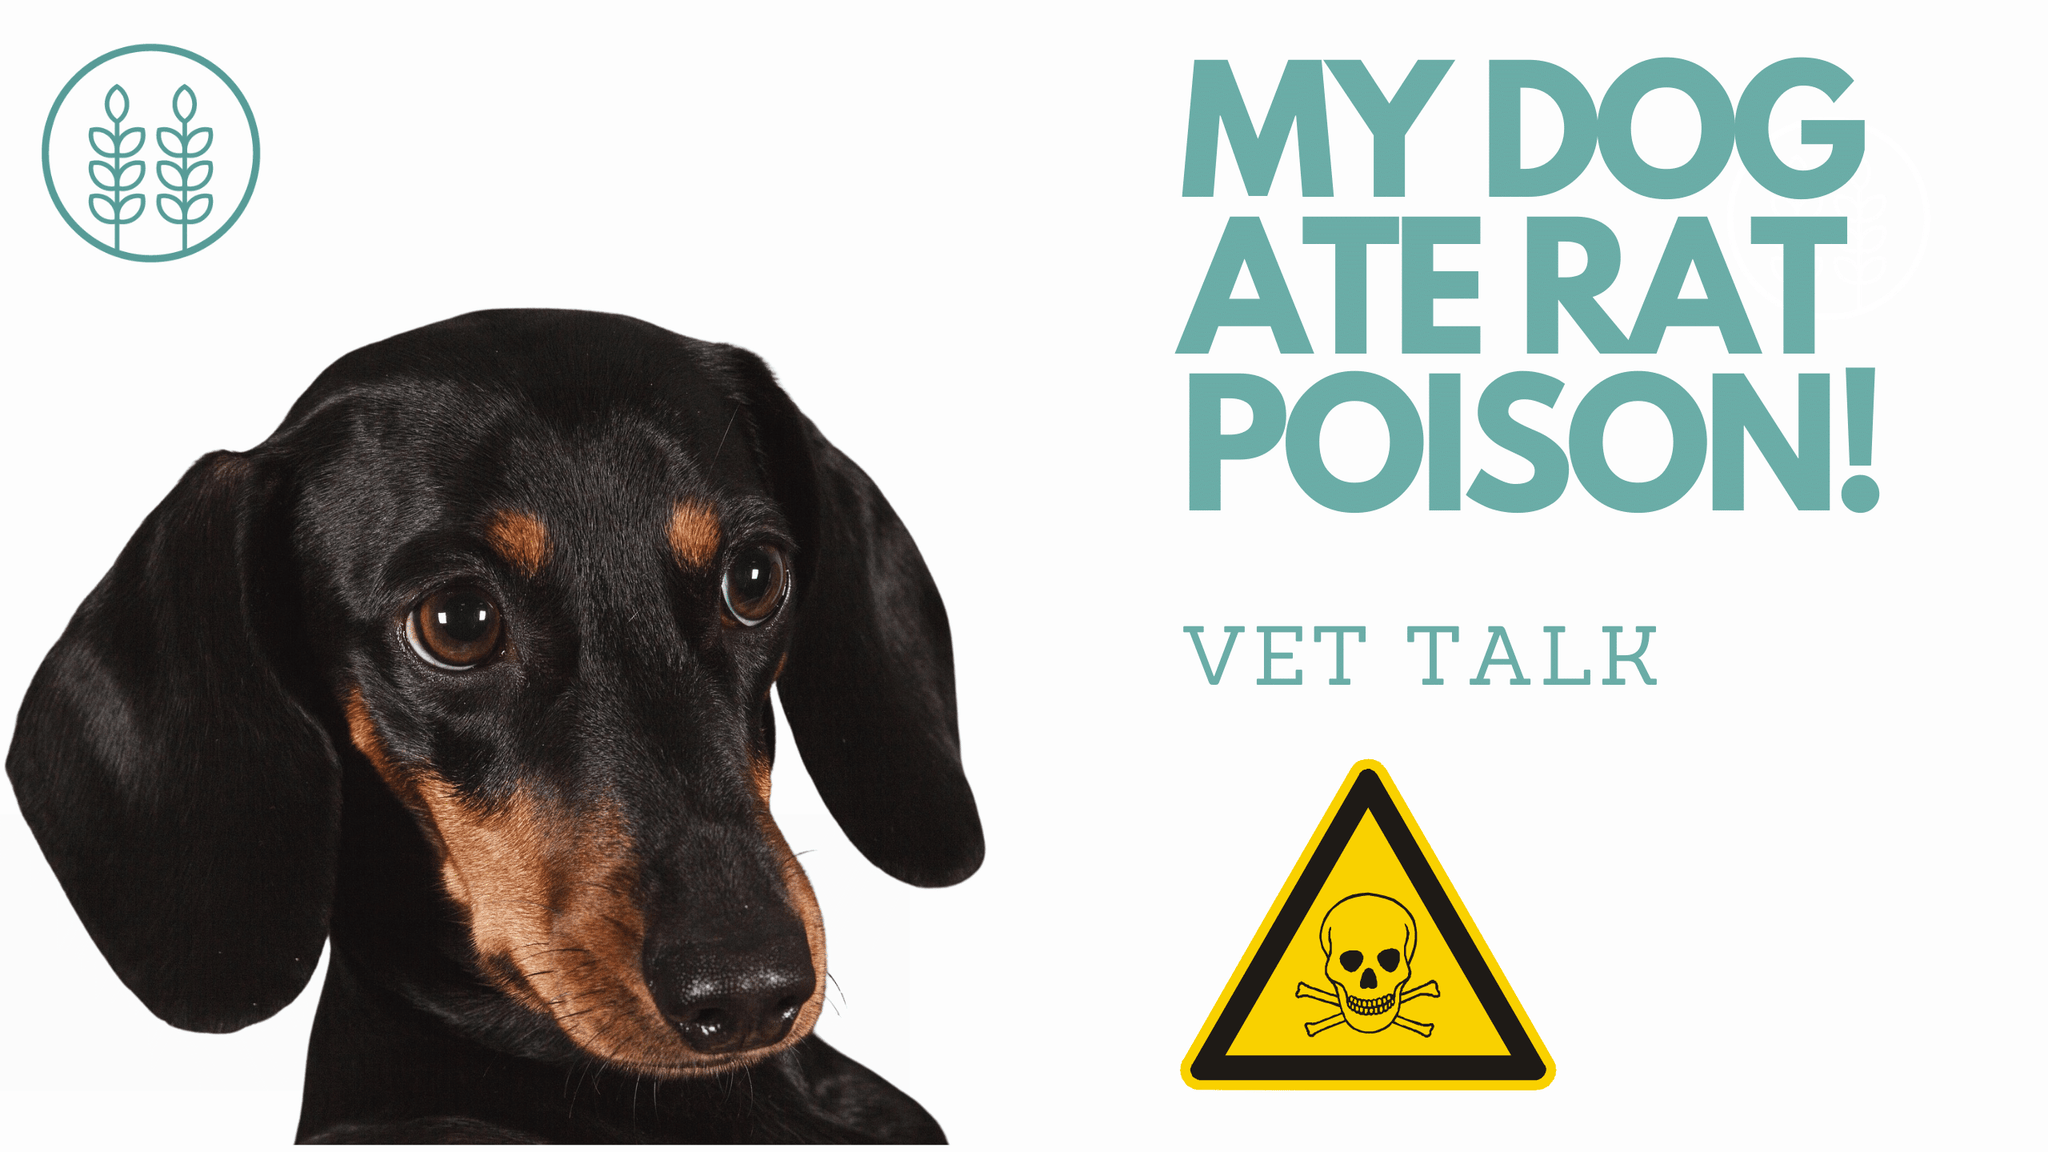 Q: My dog ate rat poison! What should I do?